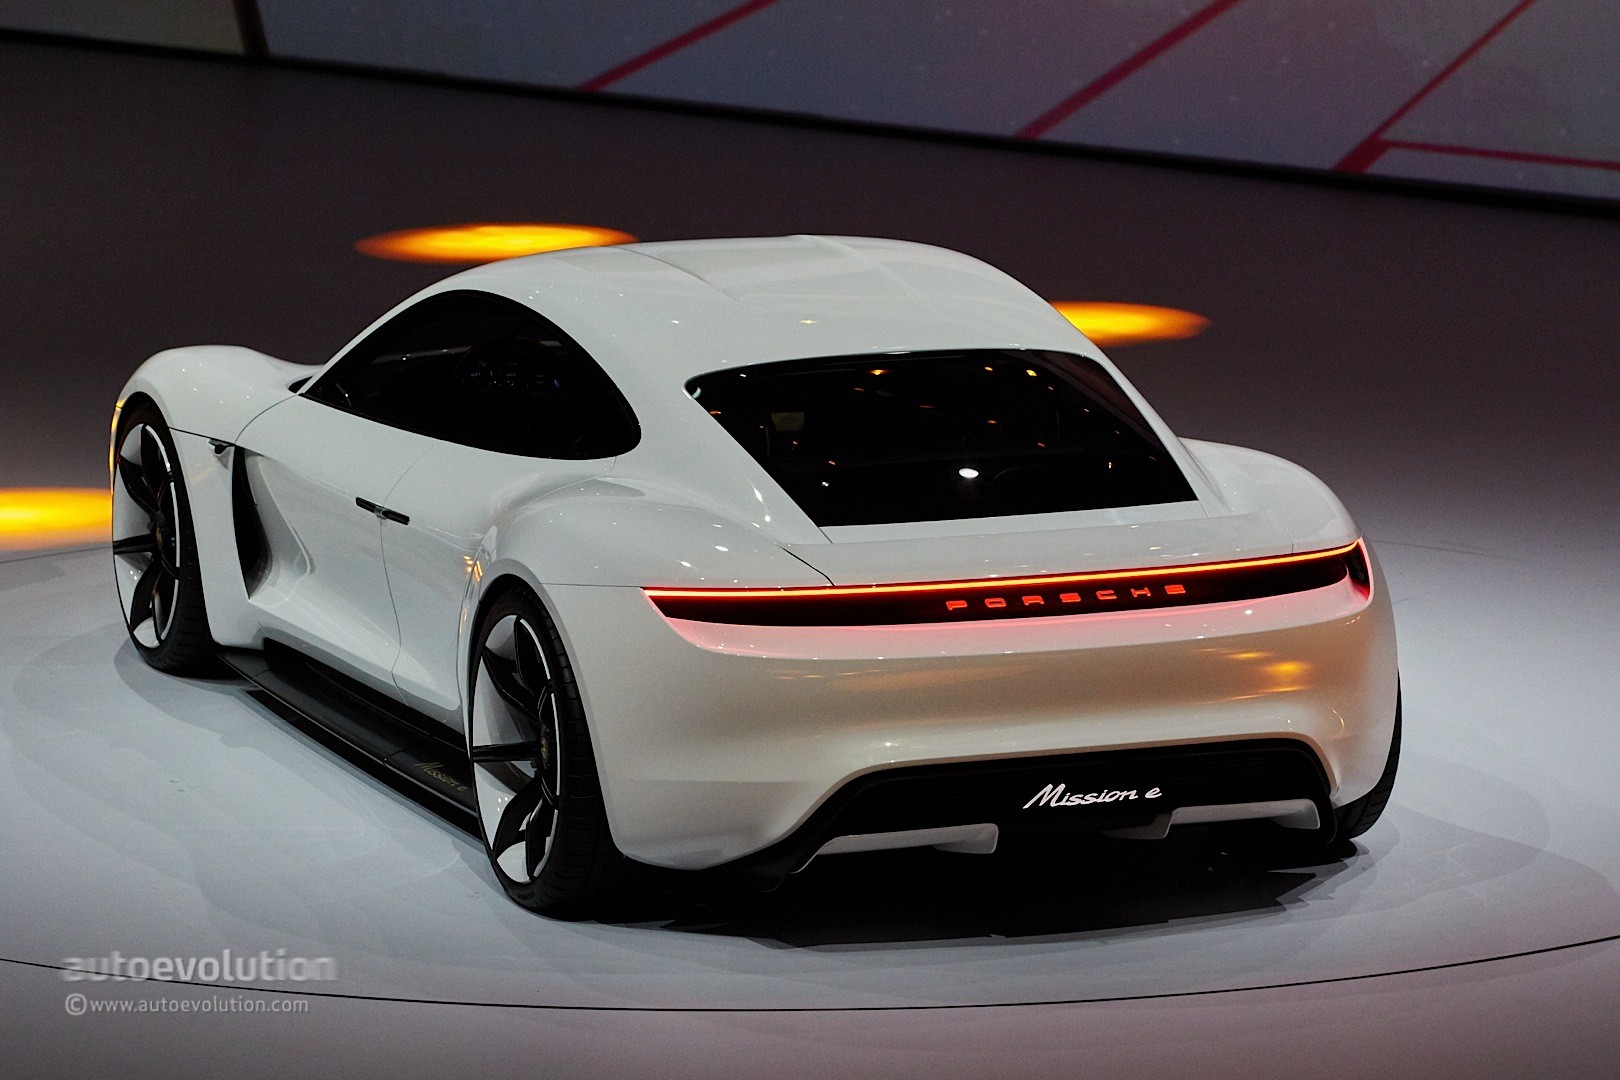 Porsche Mission E to Get Competitive $85,000 Starting Price in the U.S